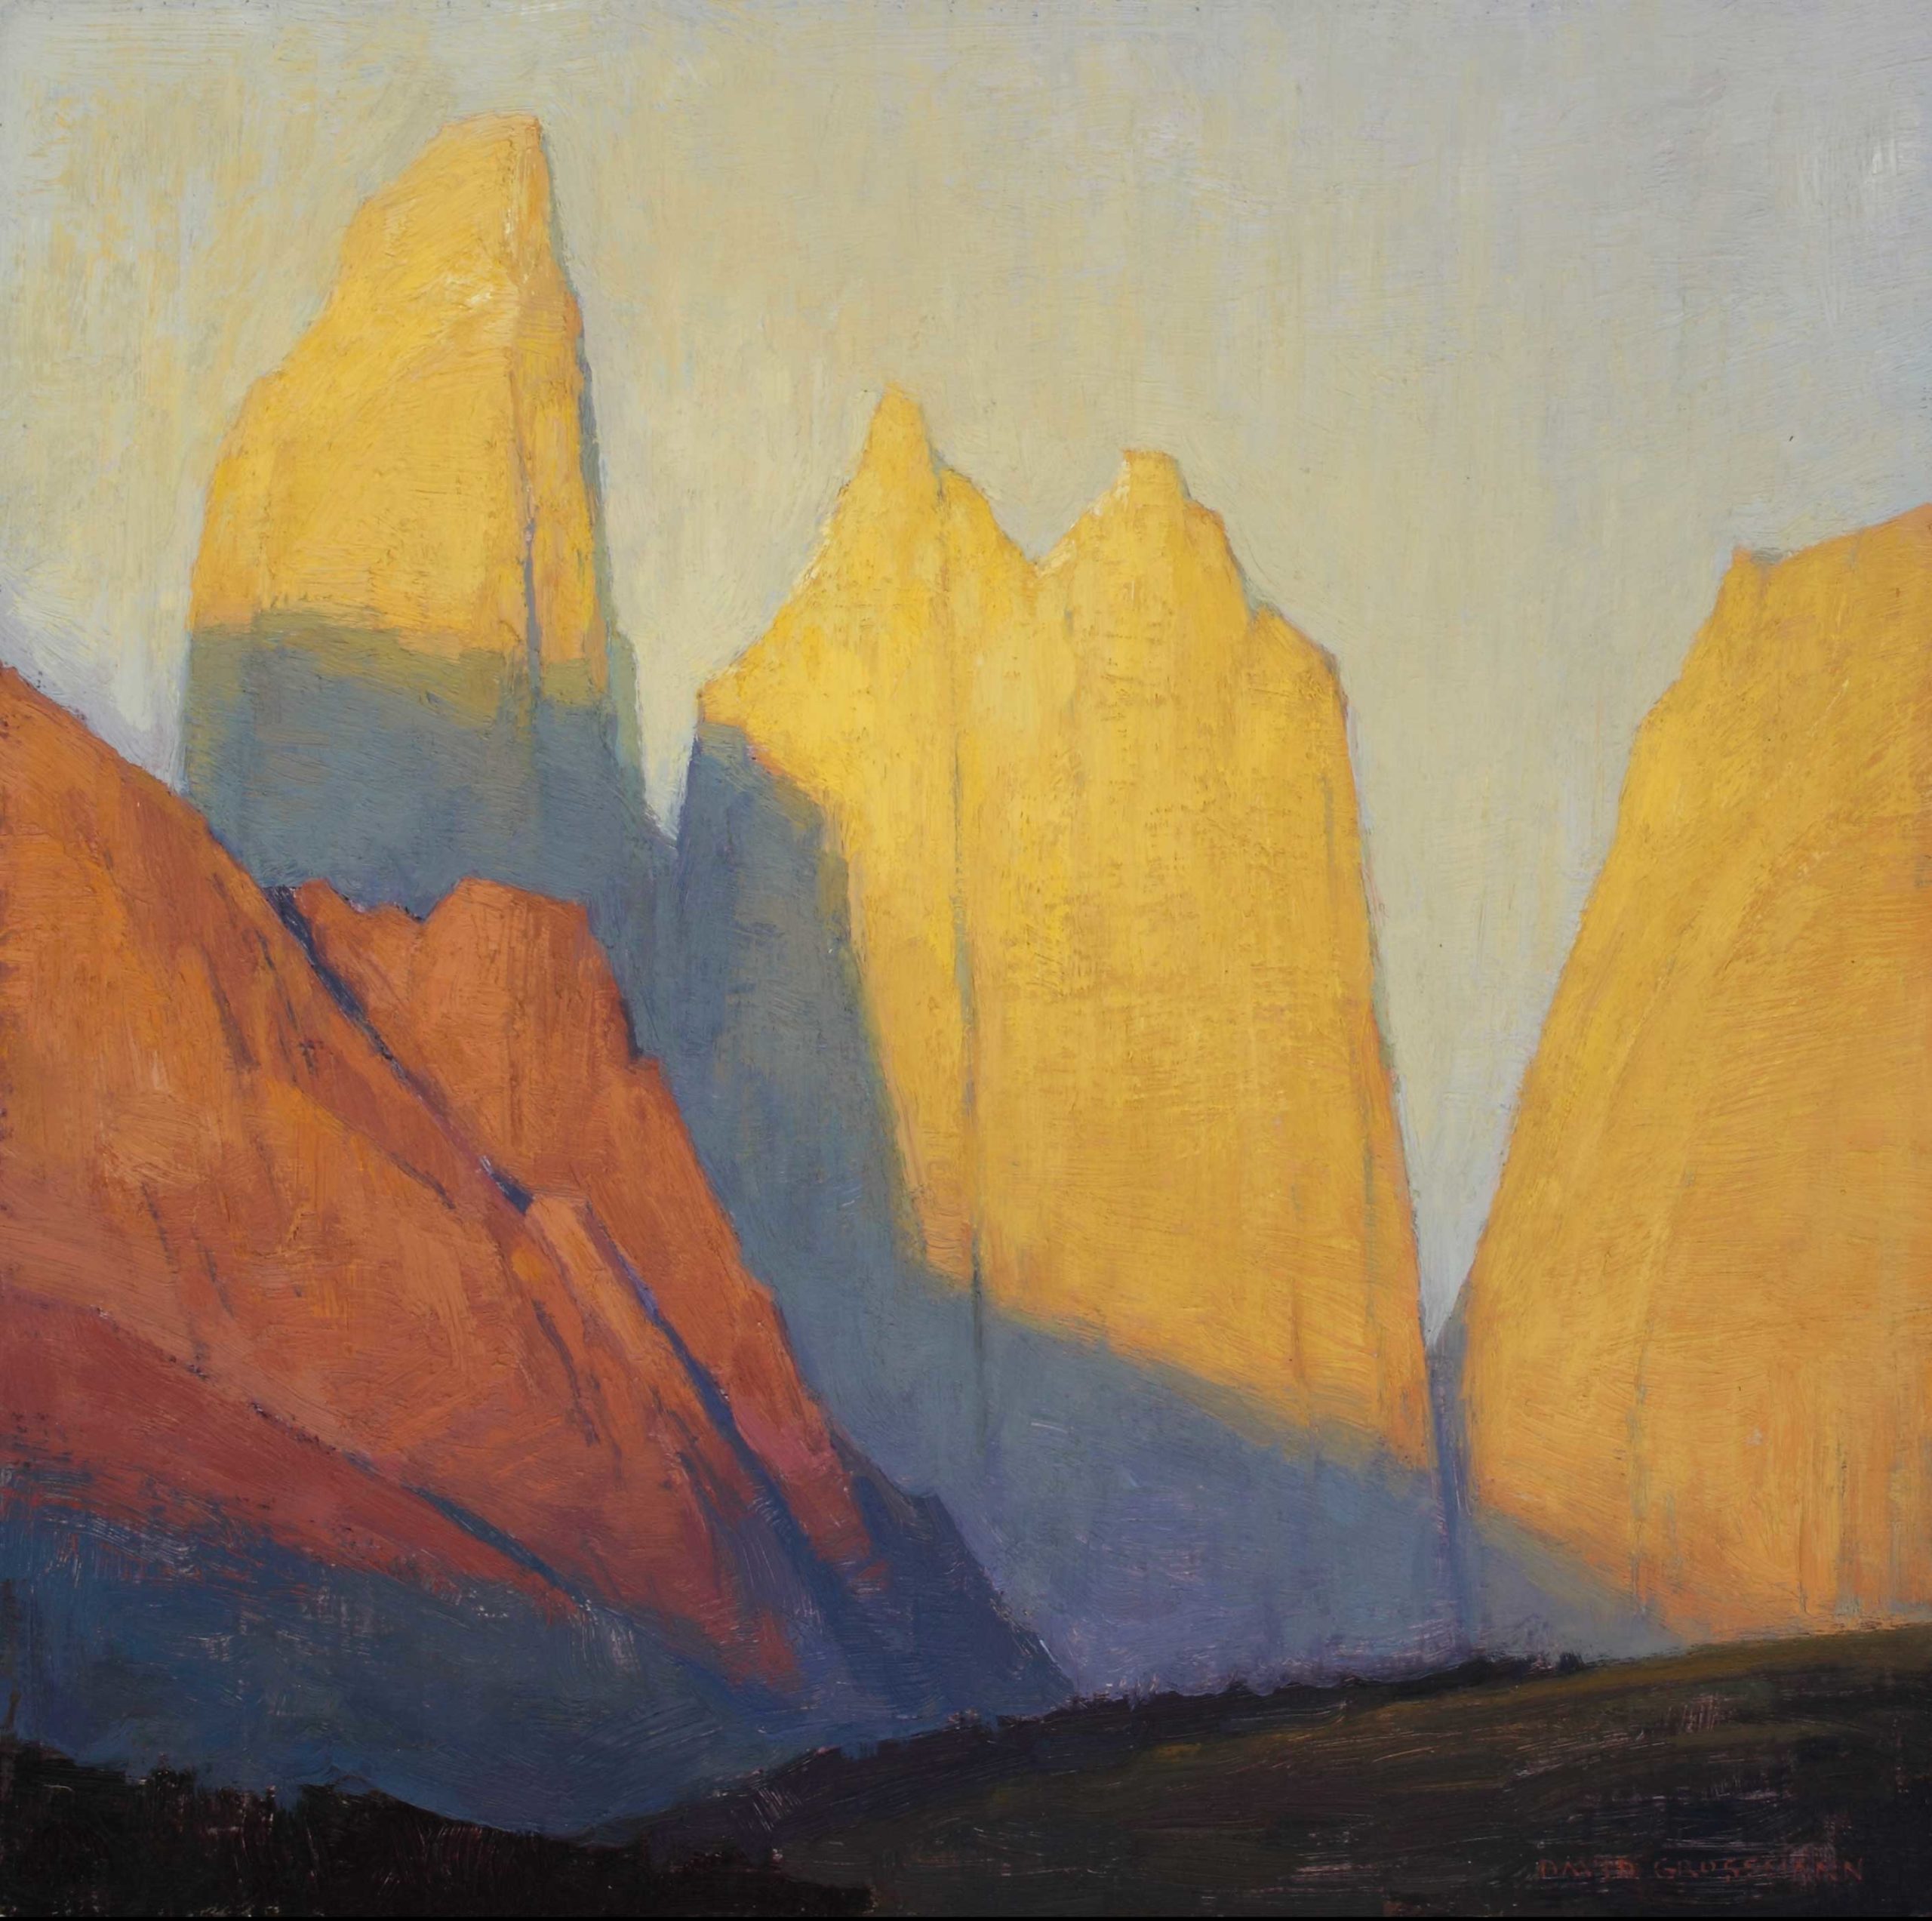 David Grossman, "Yellow Towers," 12 x 12 inches, Oil on panel